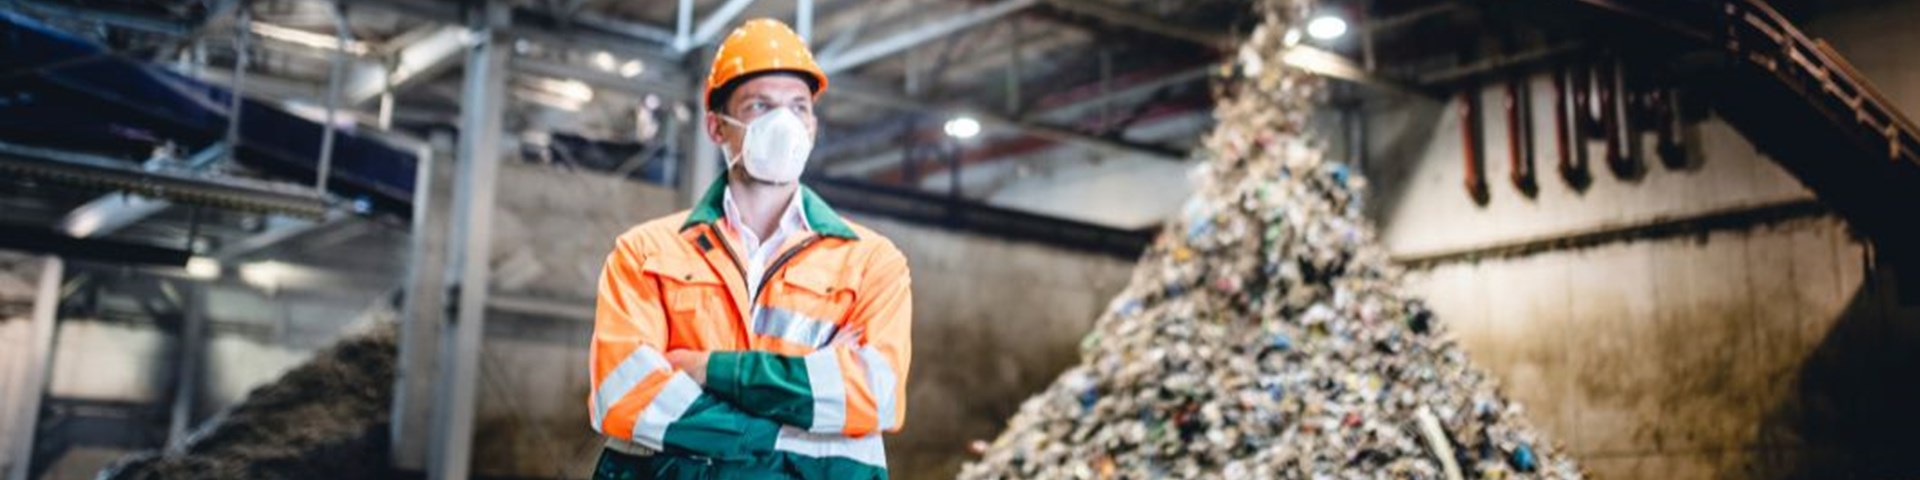 Recycling operative at waste management plant insured by ABL Waste management insurance